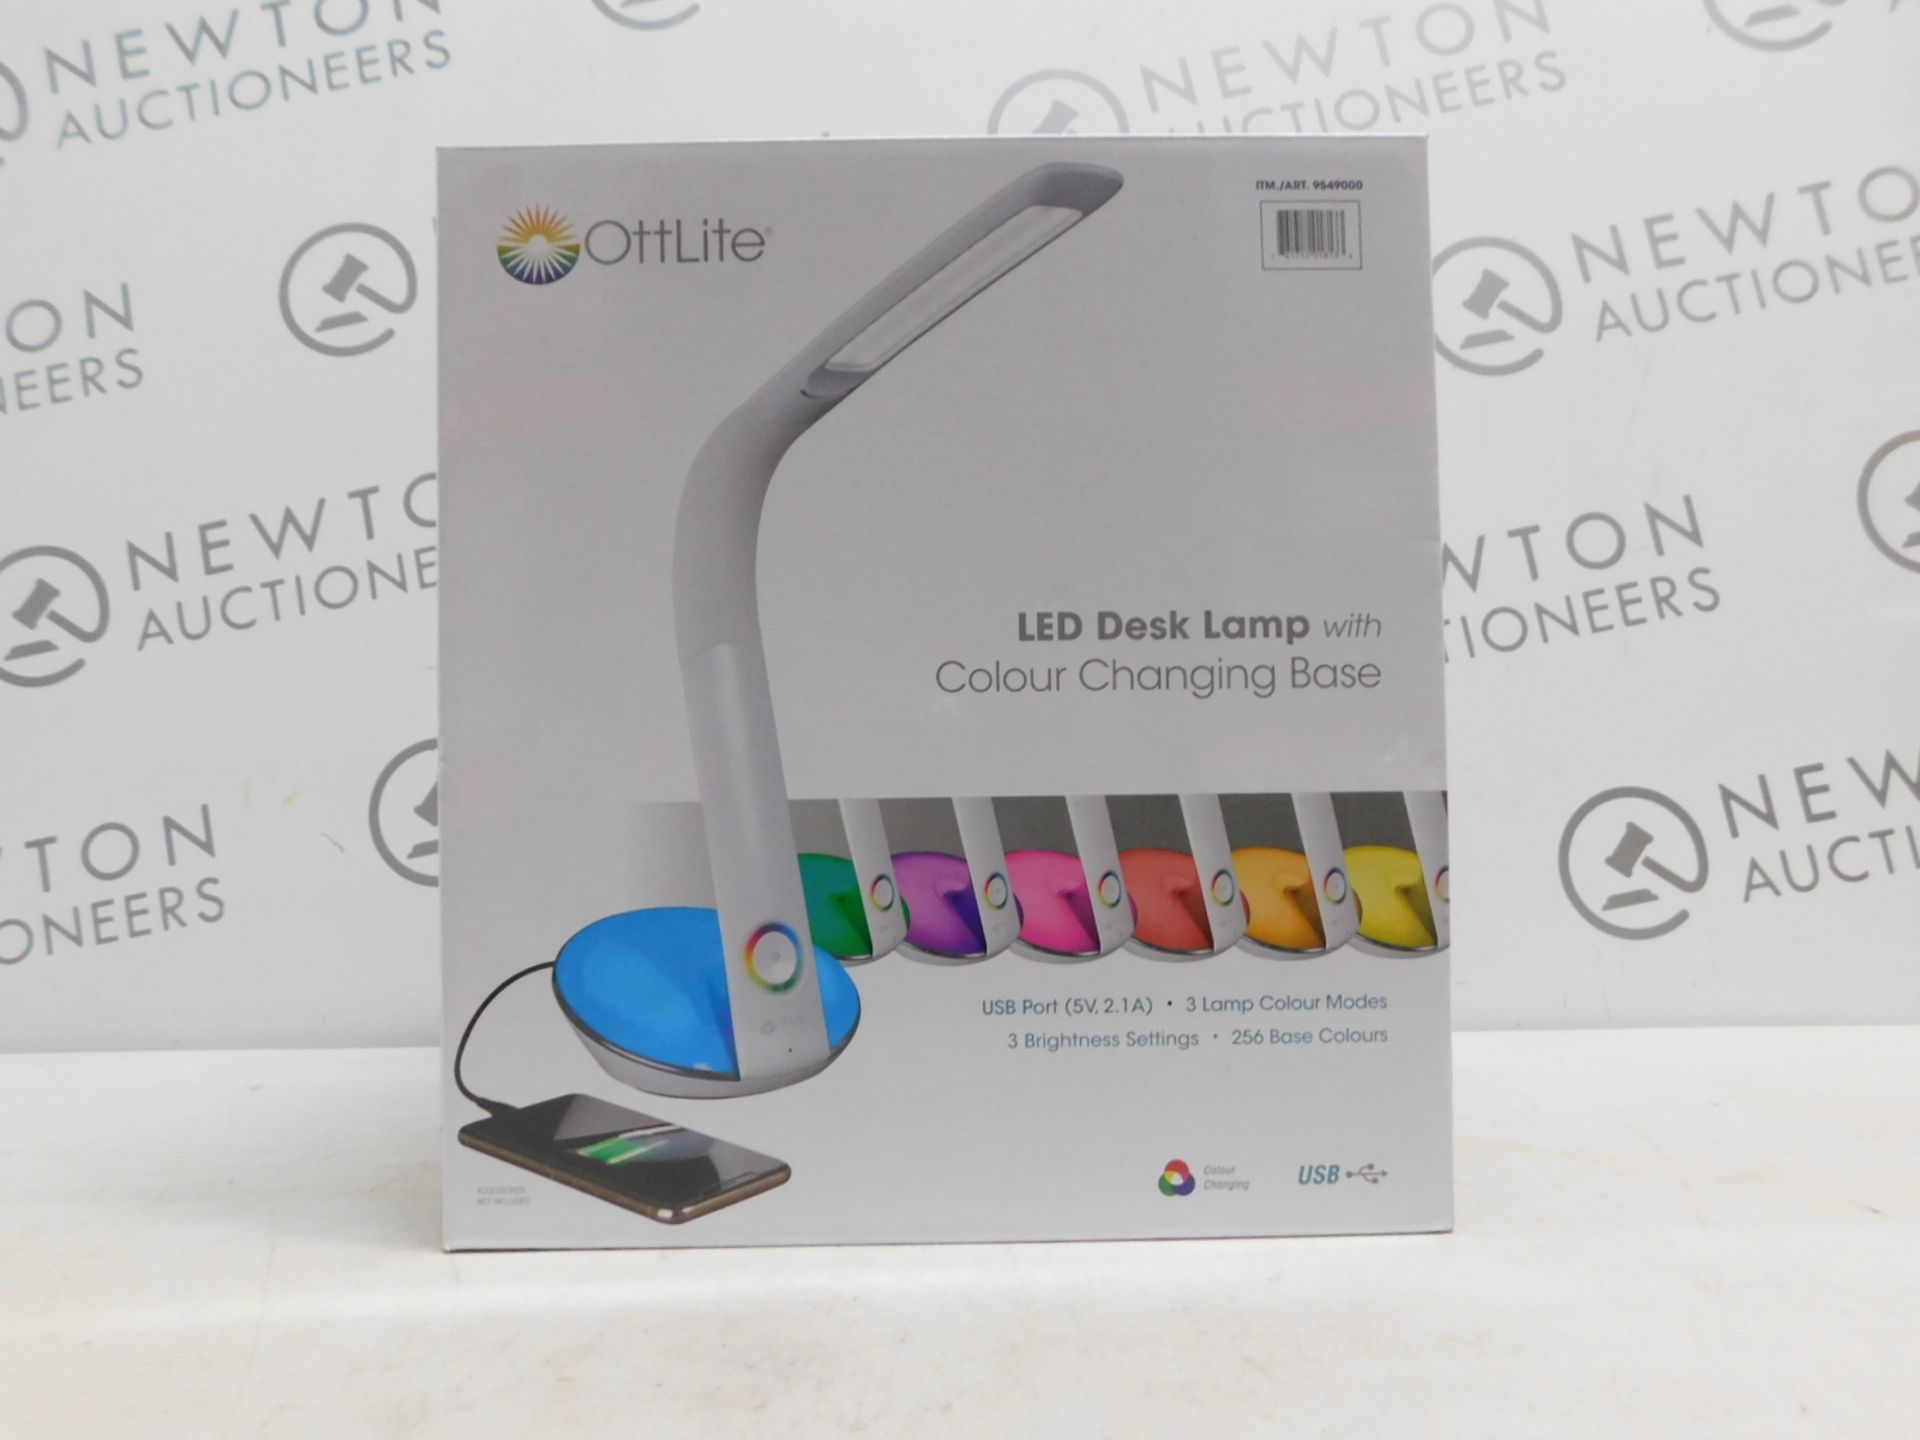 1 BOXED OTTLITE LED DESK LAMP WITH COLOUR CHANGING BASE RRP £49.99